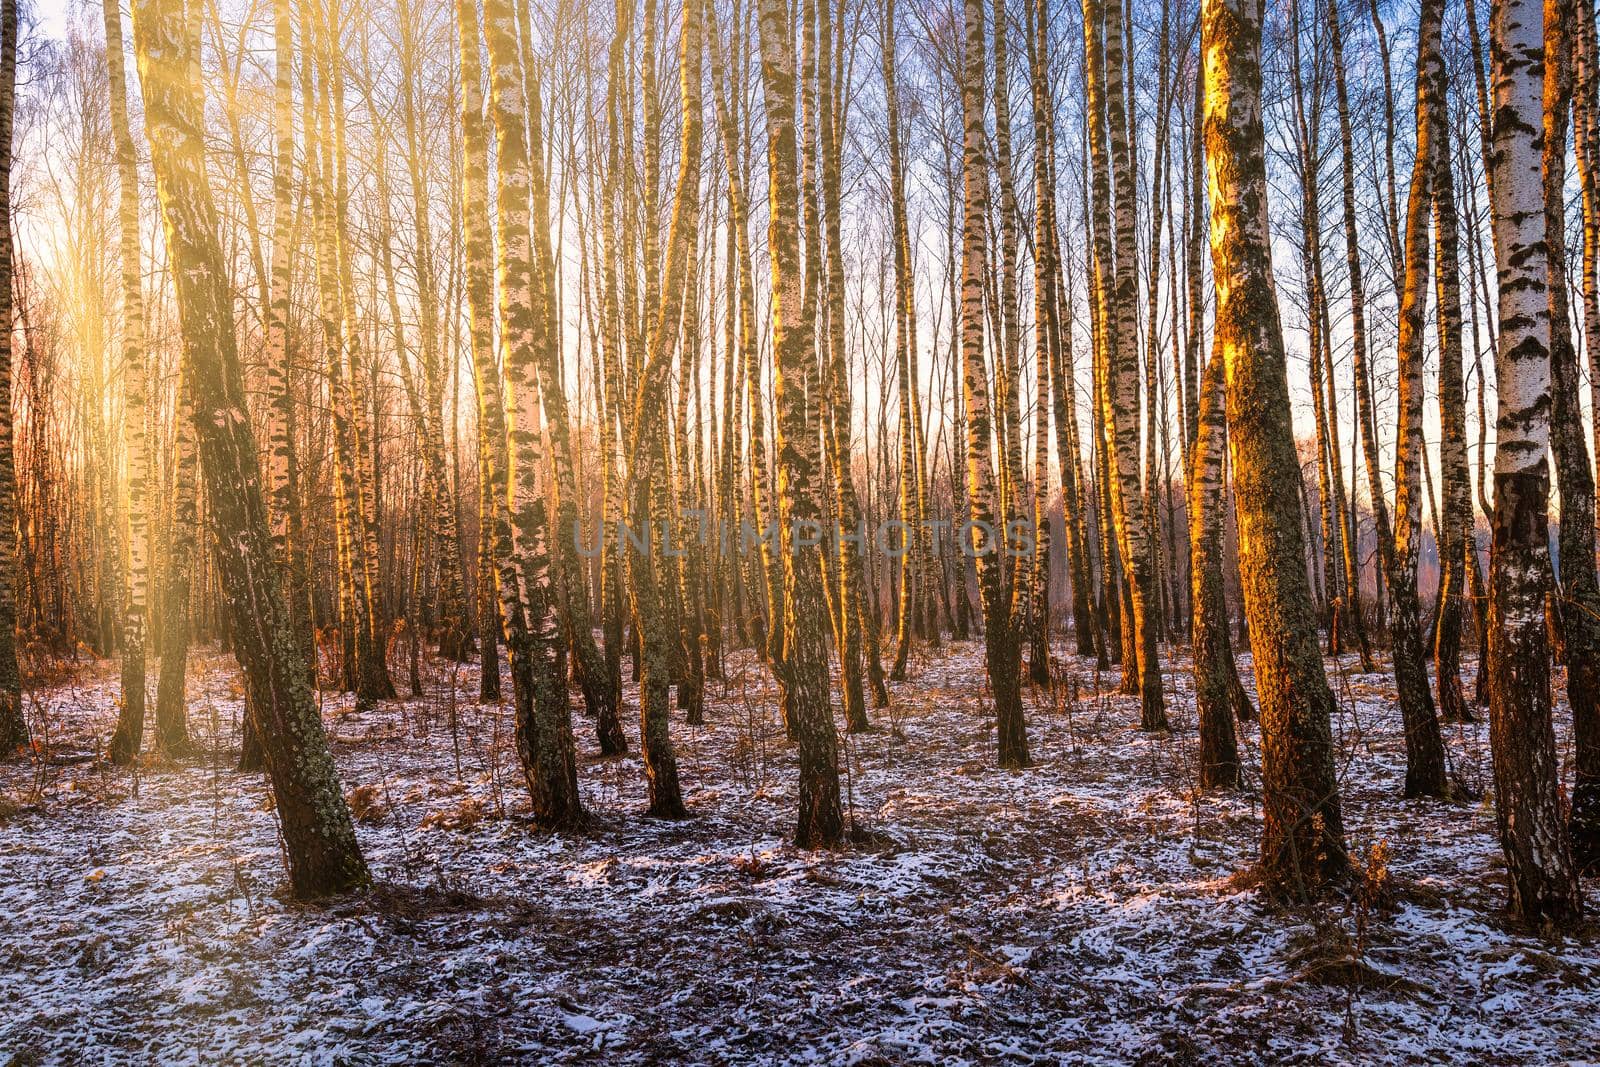 Sunset or sunrise in a birch grove with a first winter snow on earth. Rows of birch trunks with the sun's rays passing through them.